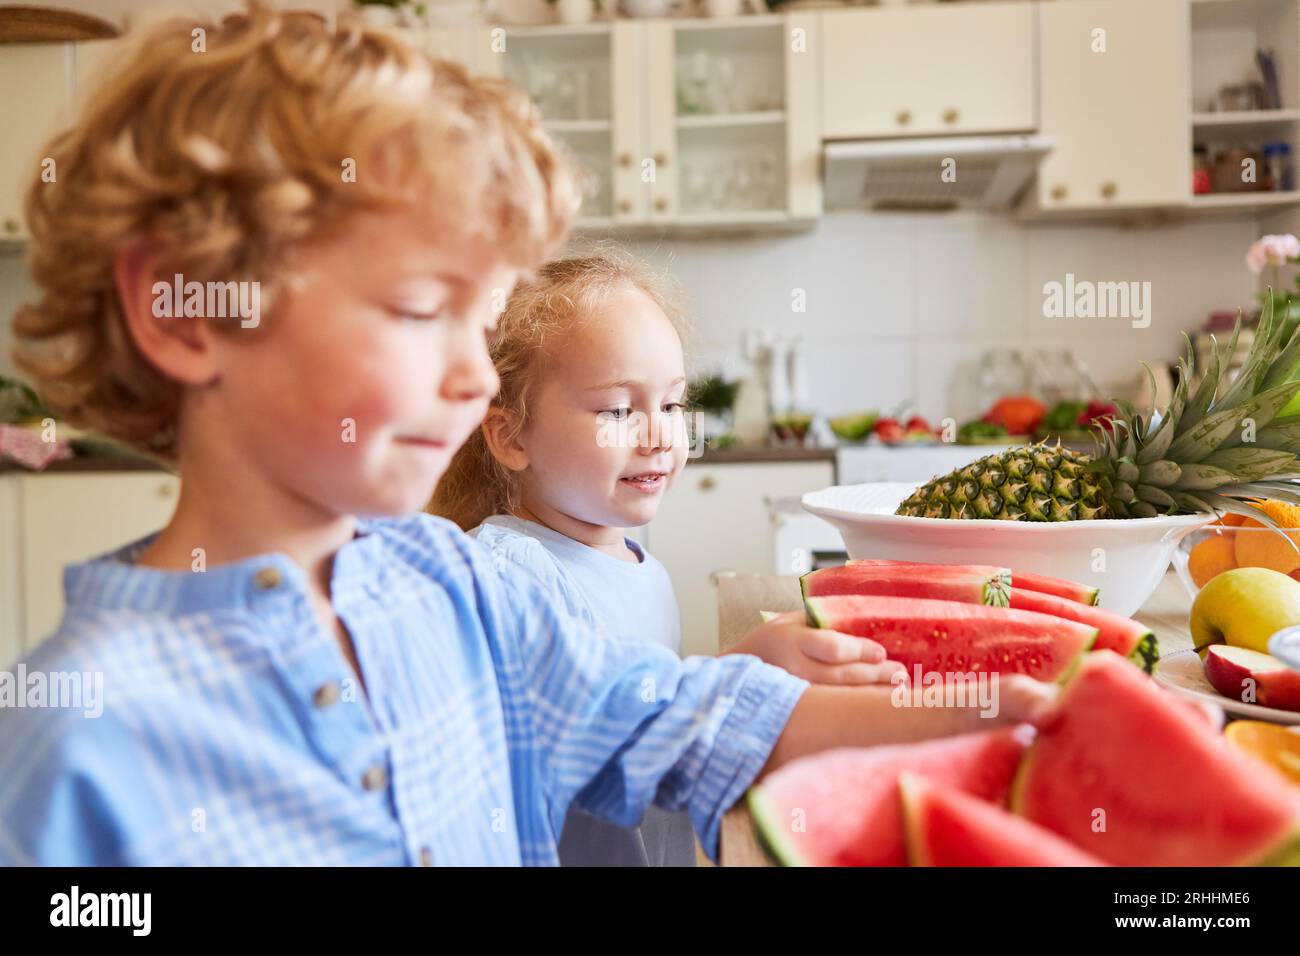 Sister choosing fresh watermelon slices with brother while standing in kitchen at home Stock Photo